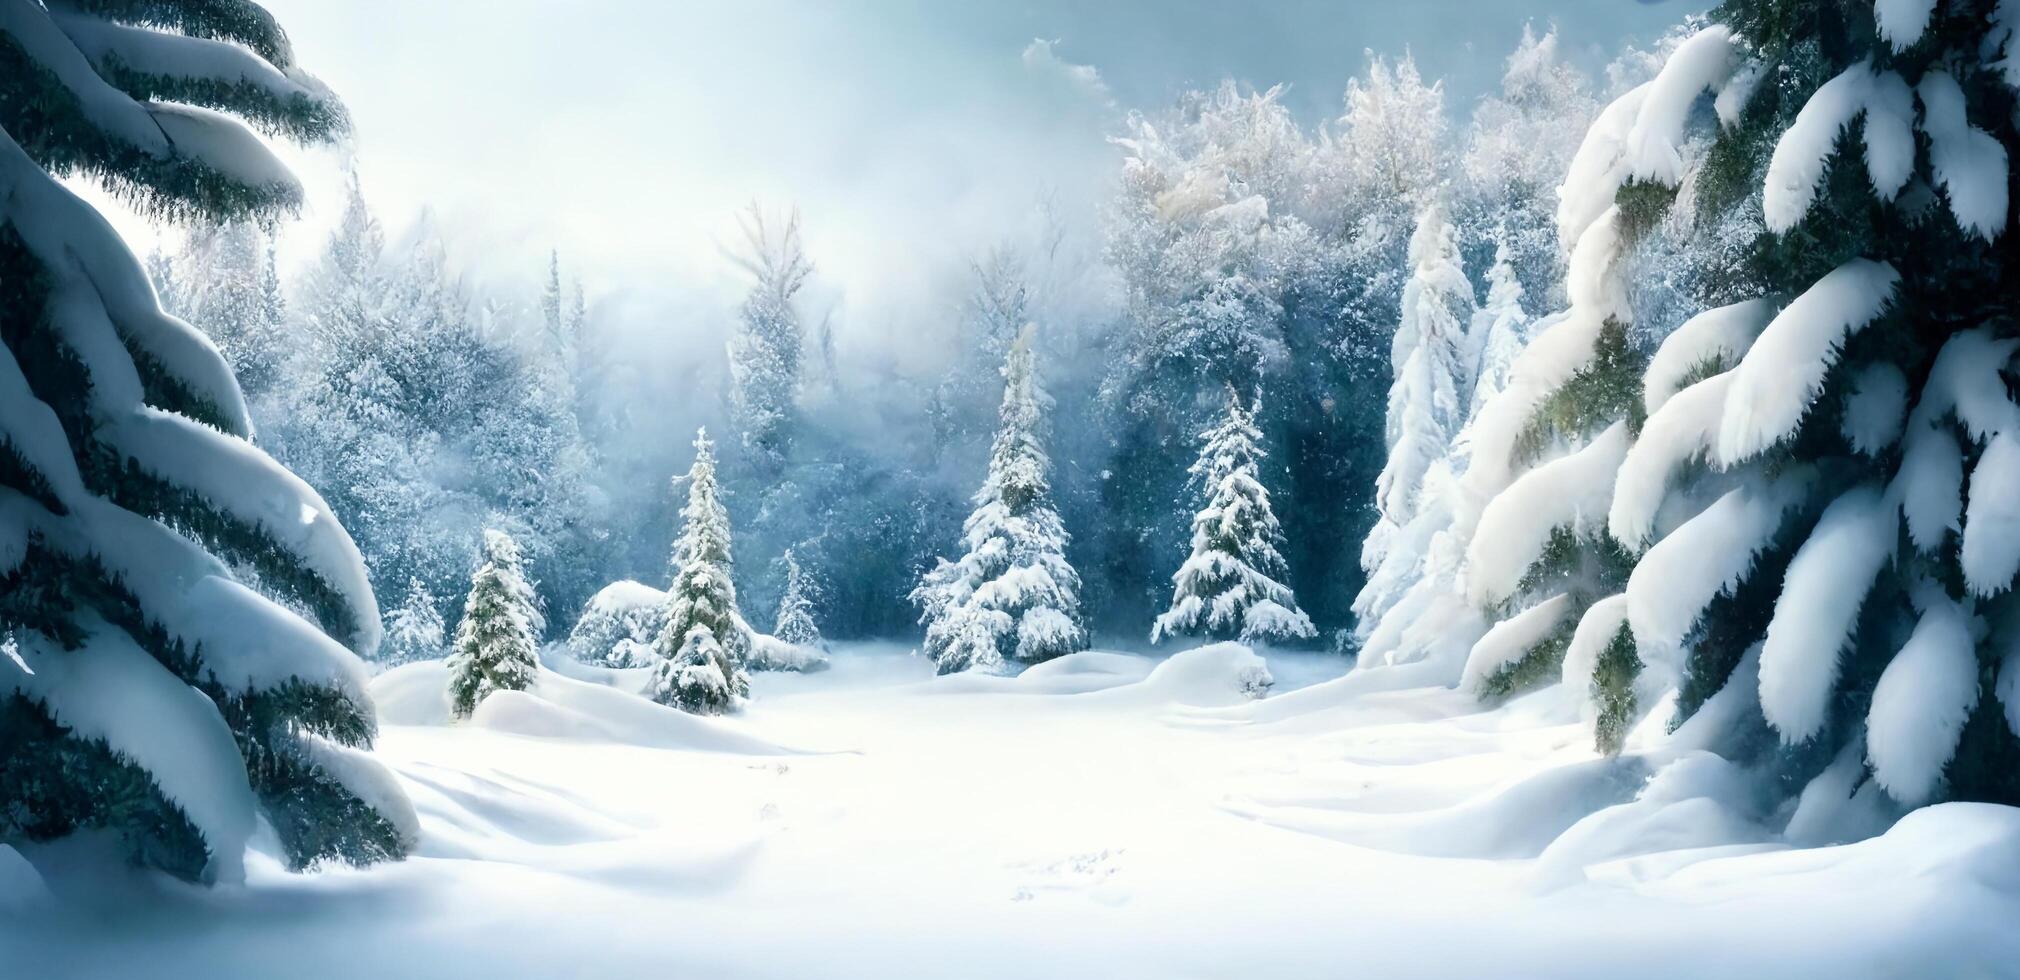 The landscape of snowy forest in winter with . photo